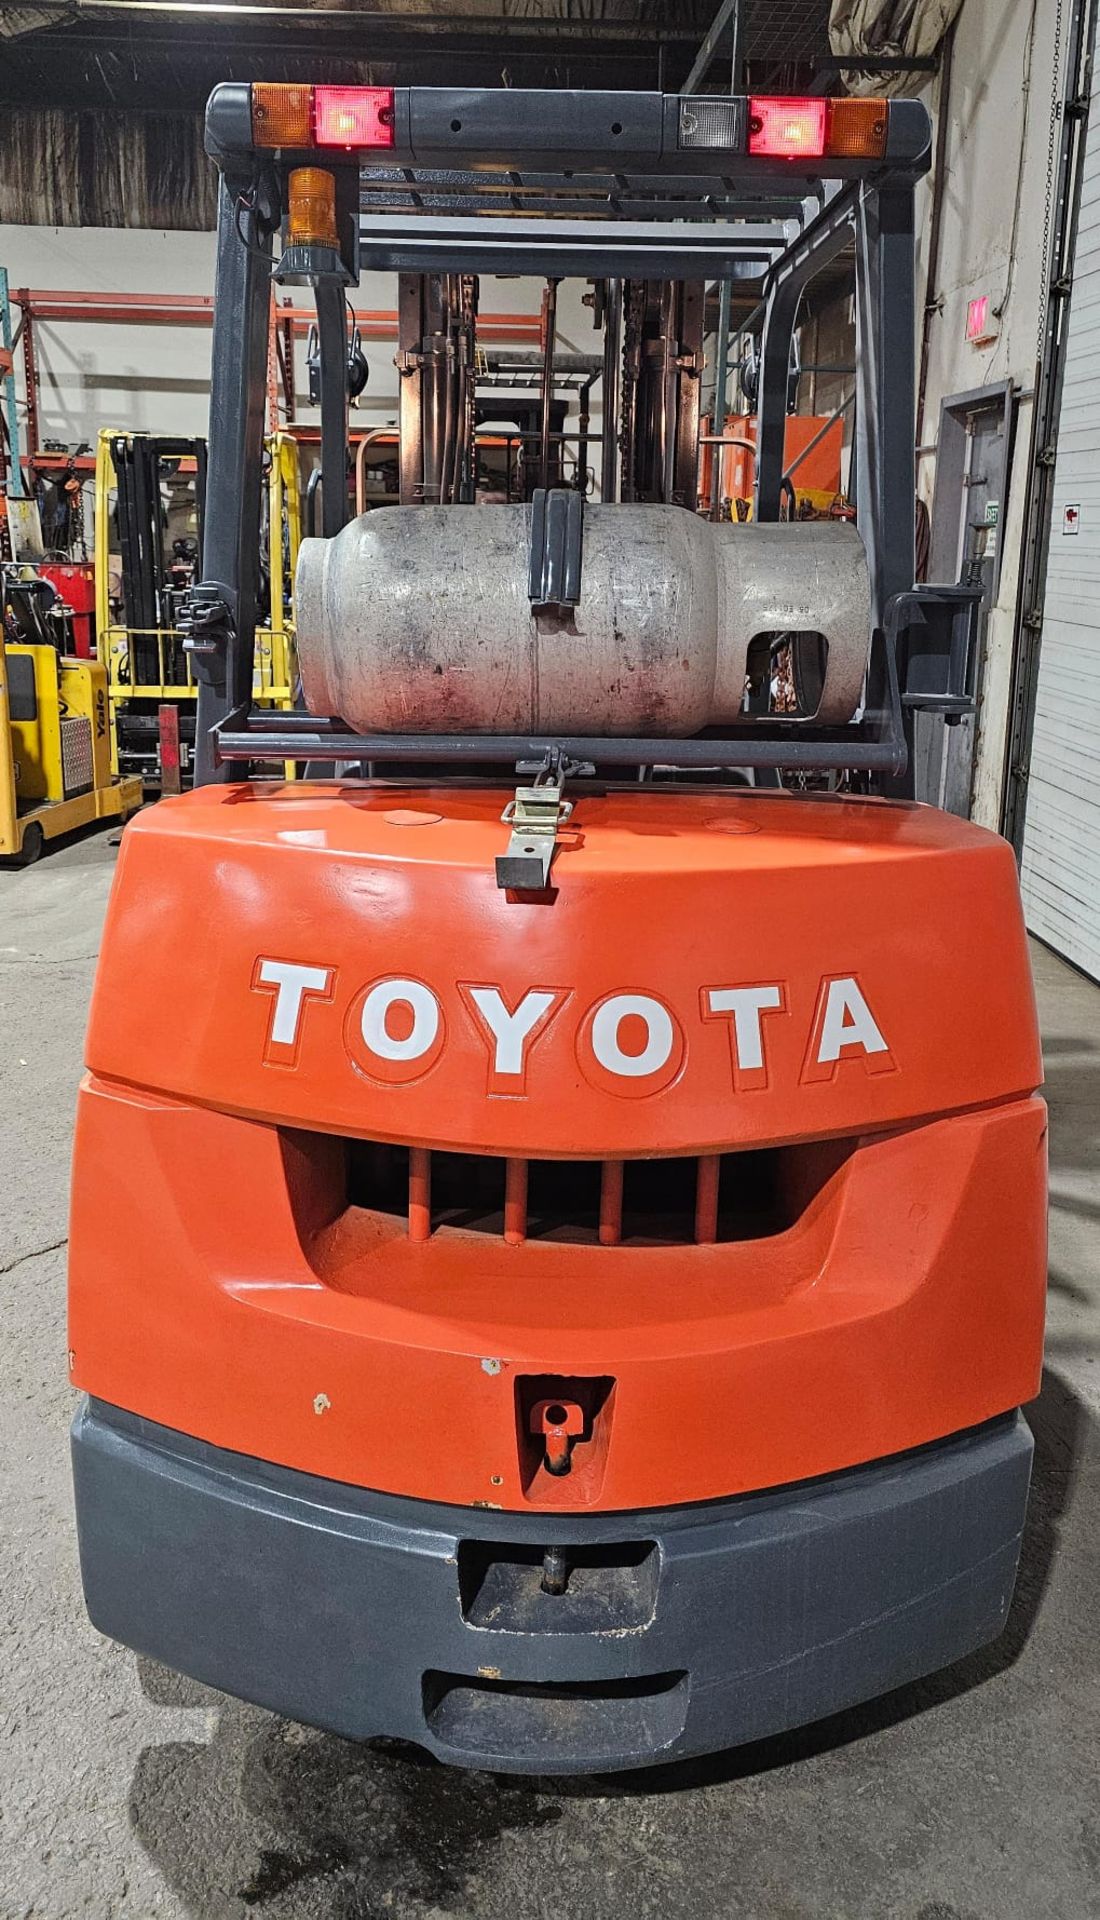 Toyota 7,000lbs Capacity LPG (Propane) Forklift with sideshift 60" Forks & 3-STAGE MAST 187" - Image 3 of 5